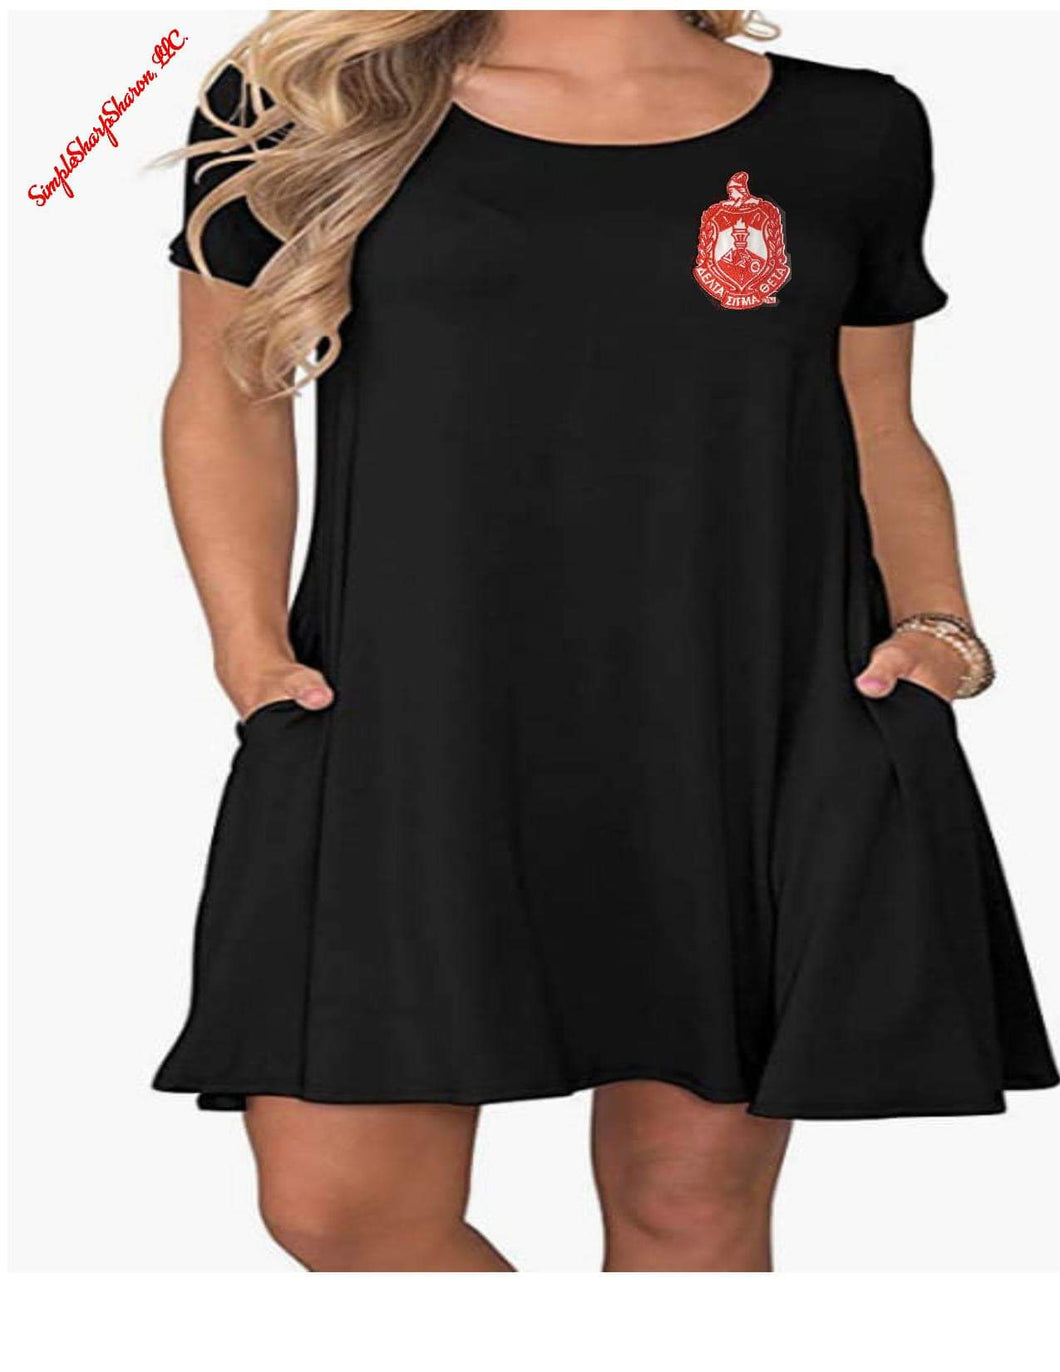 Black Swing Dress with DST Shield